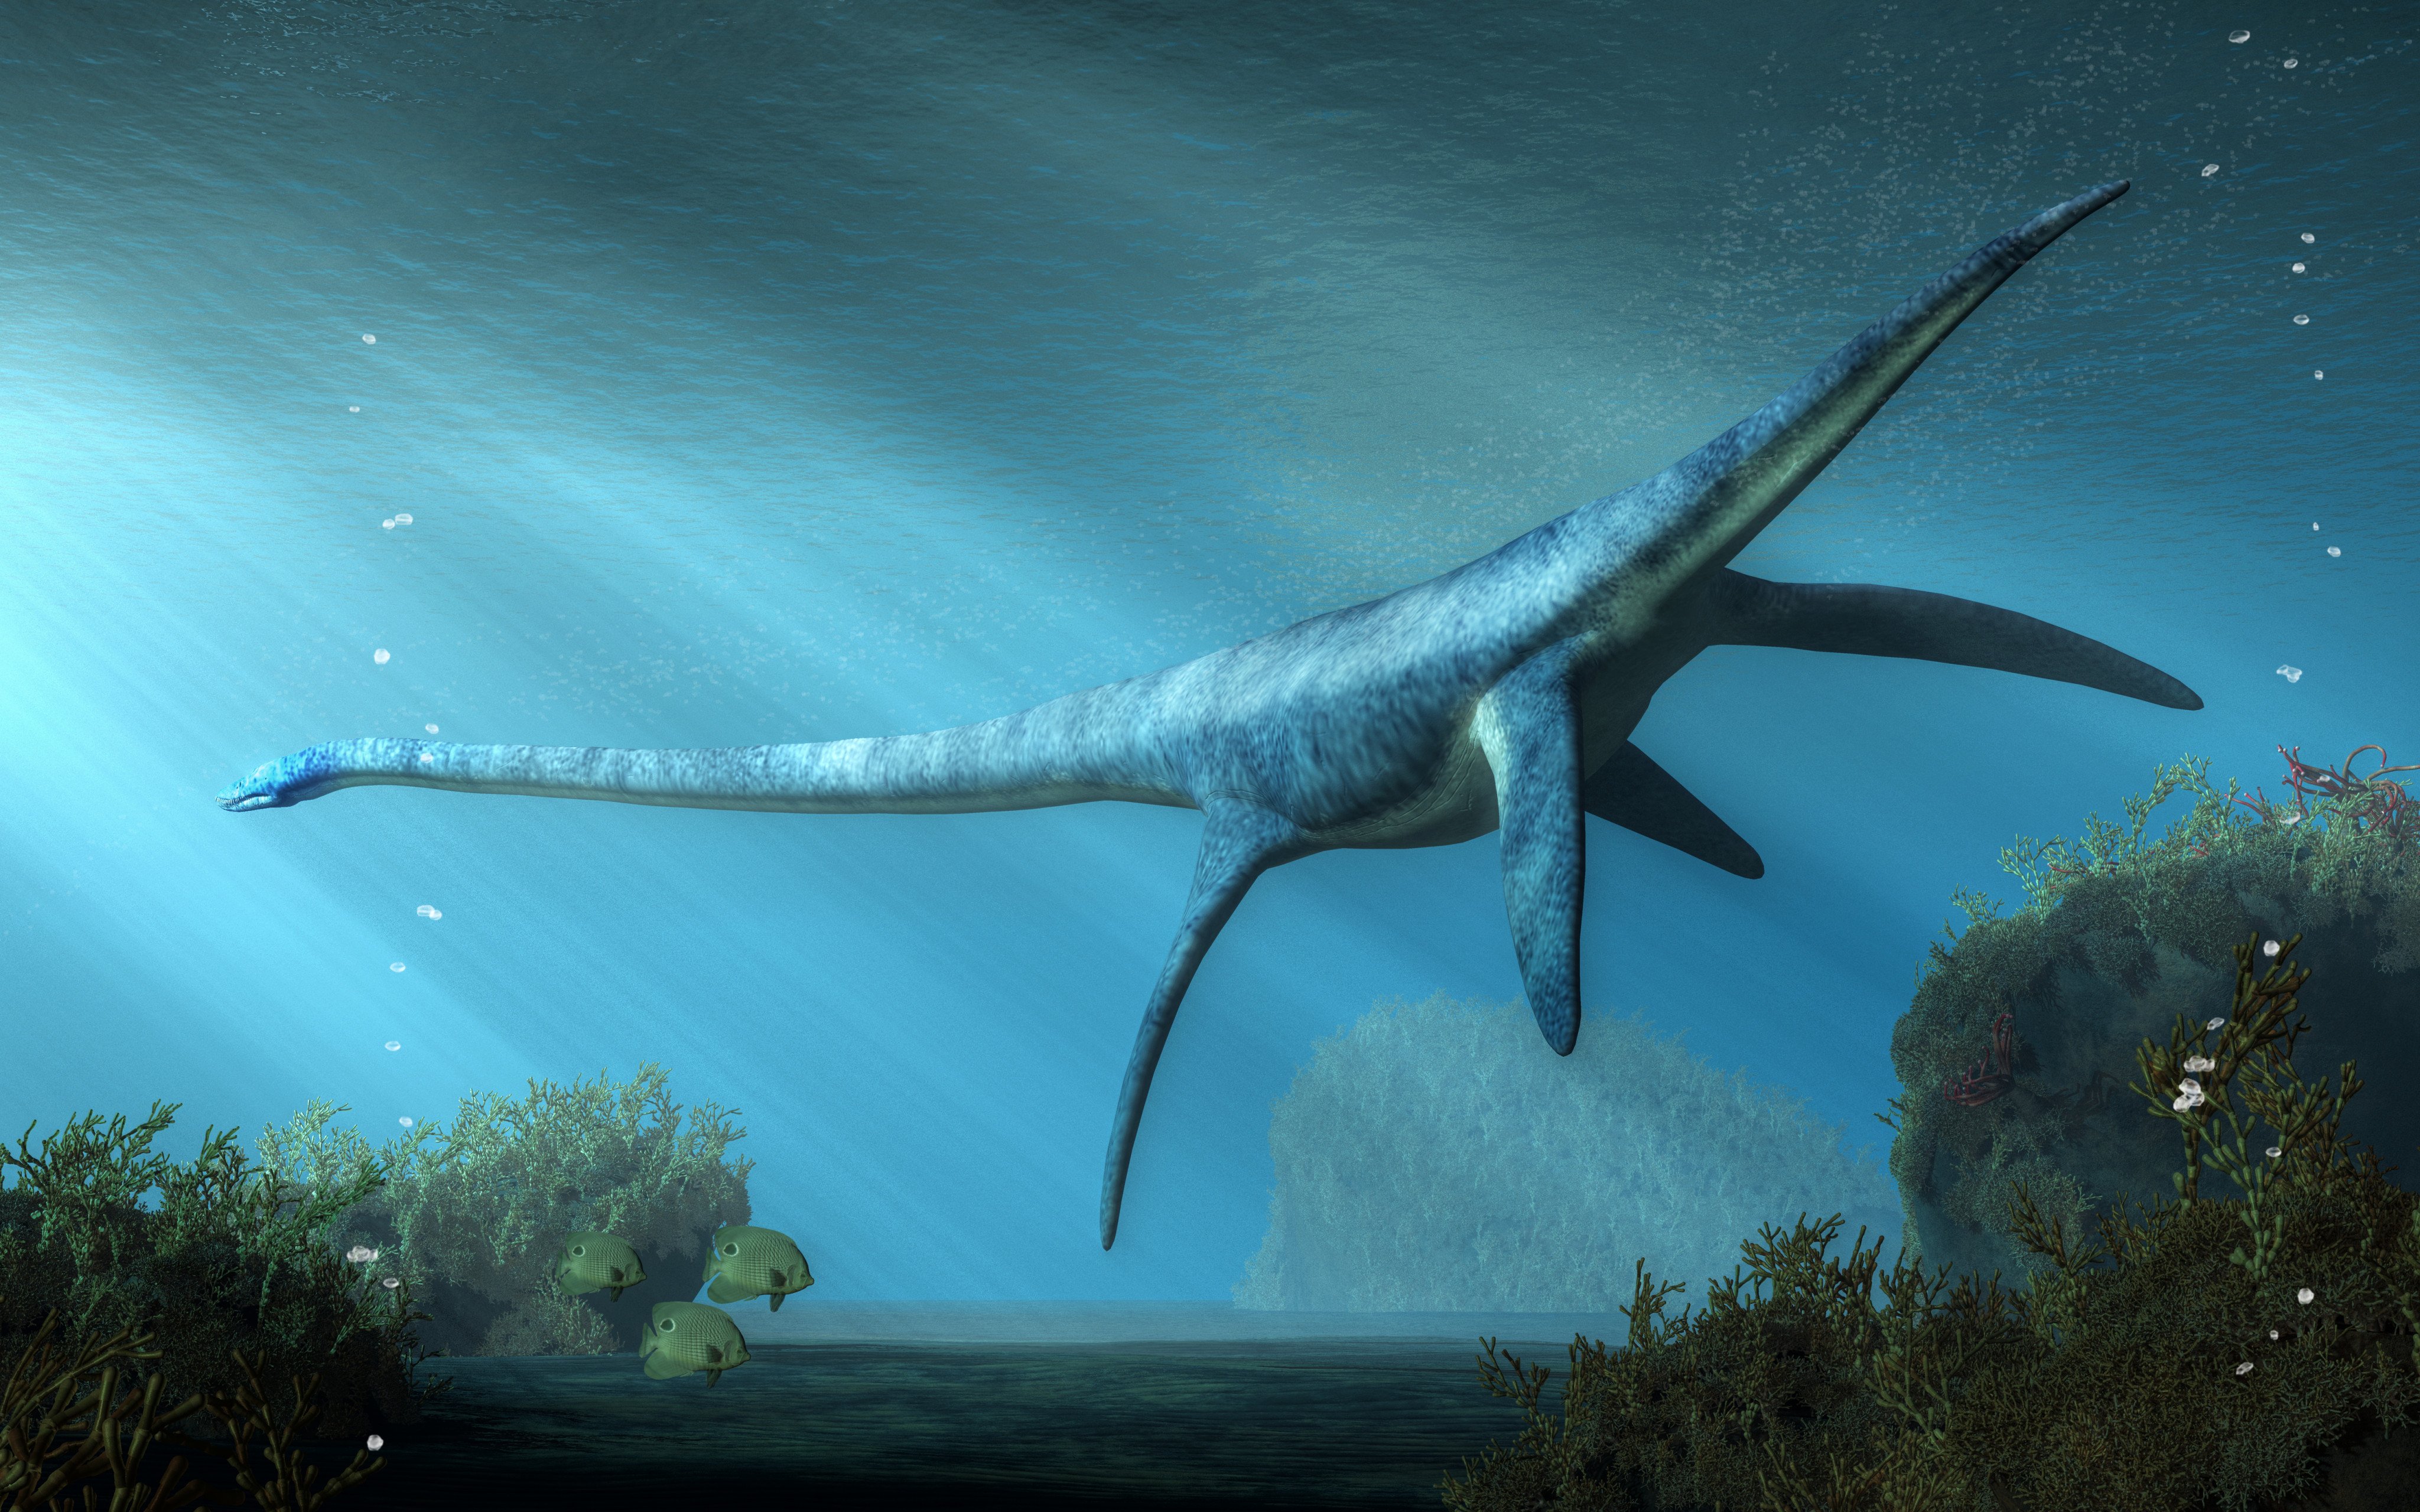 Plesiosaurs appeared about 203 million years ago and ruled the oceans unchallenged for millions of years. Photo: Shutterstock